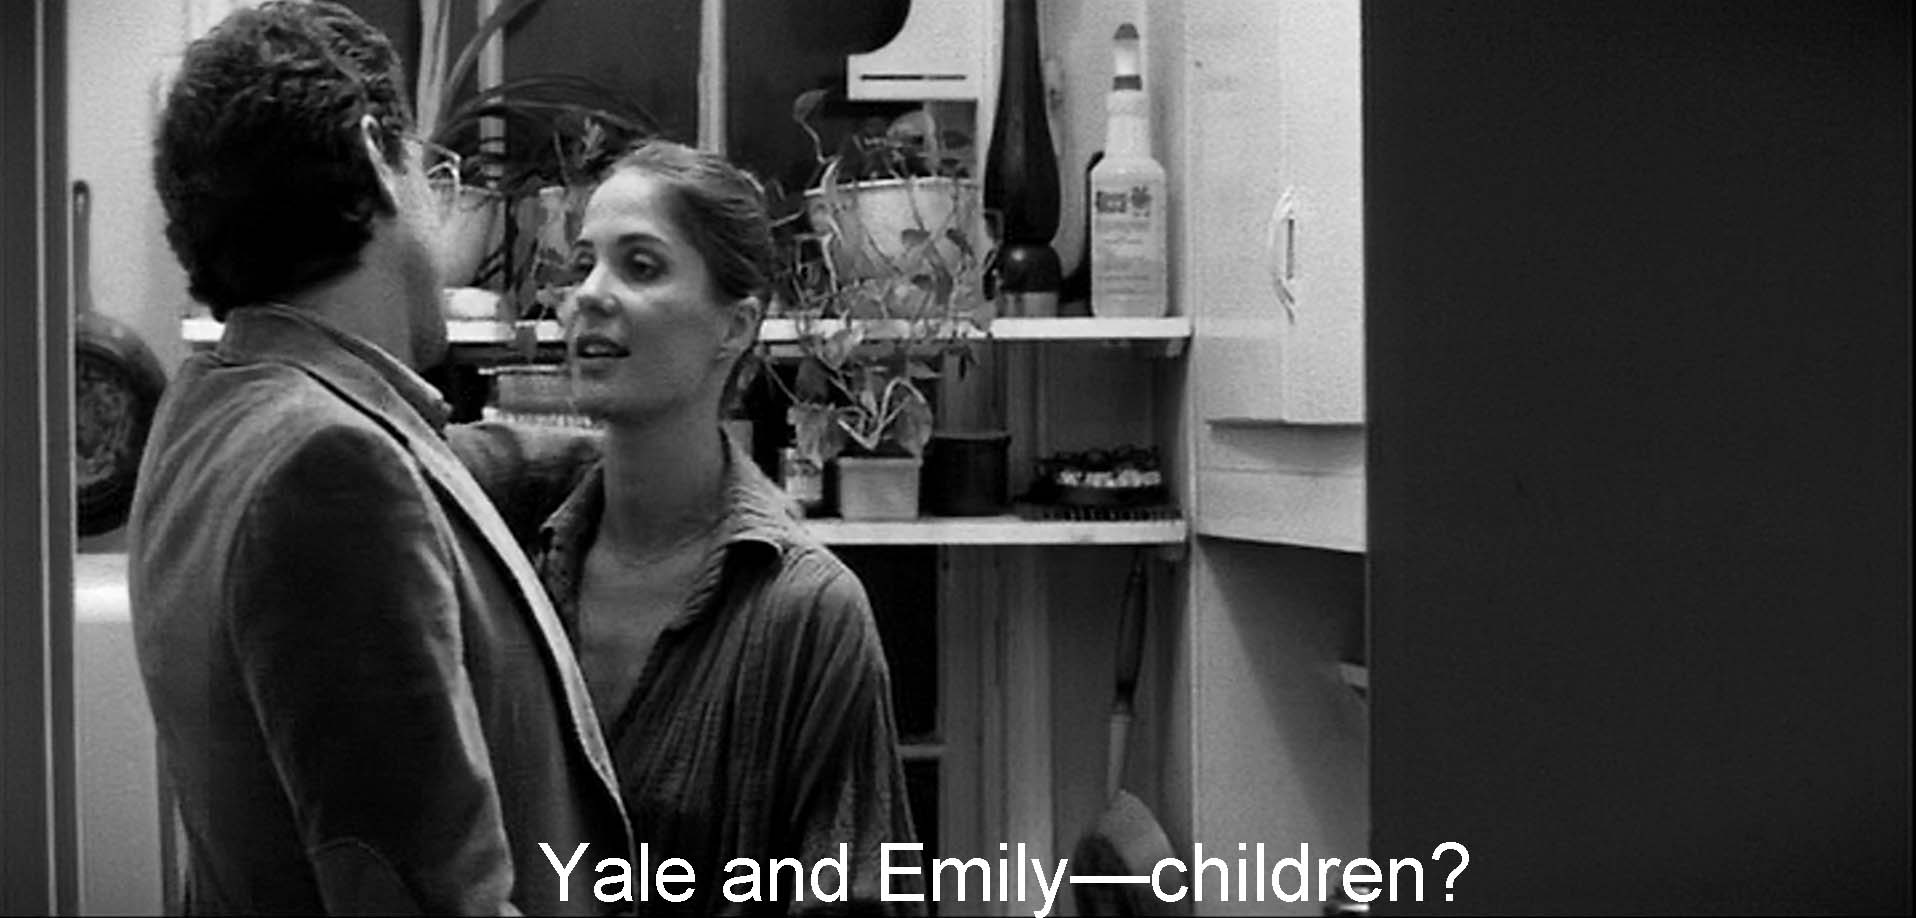 Yale and Emily—children?